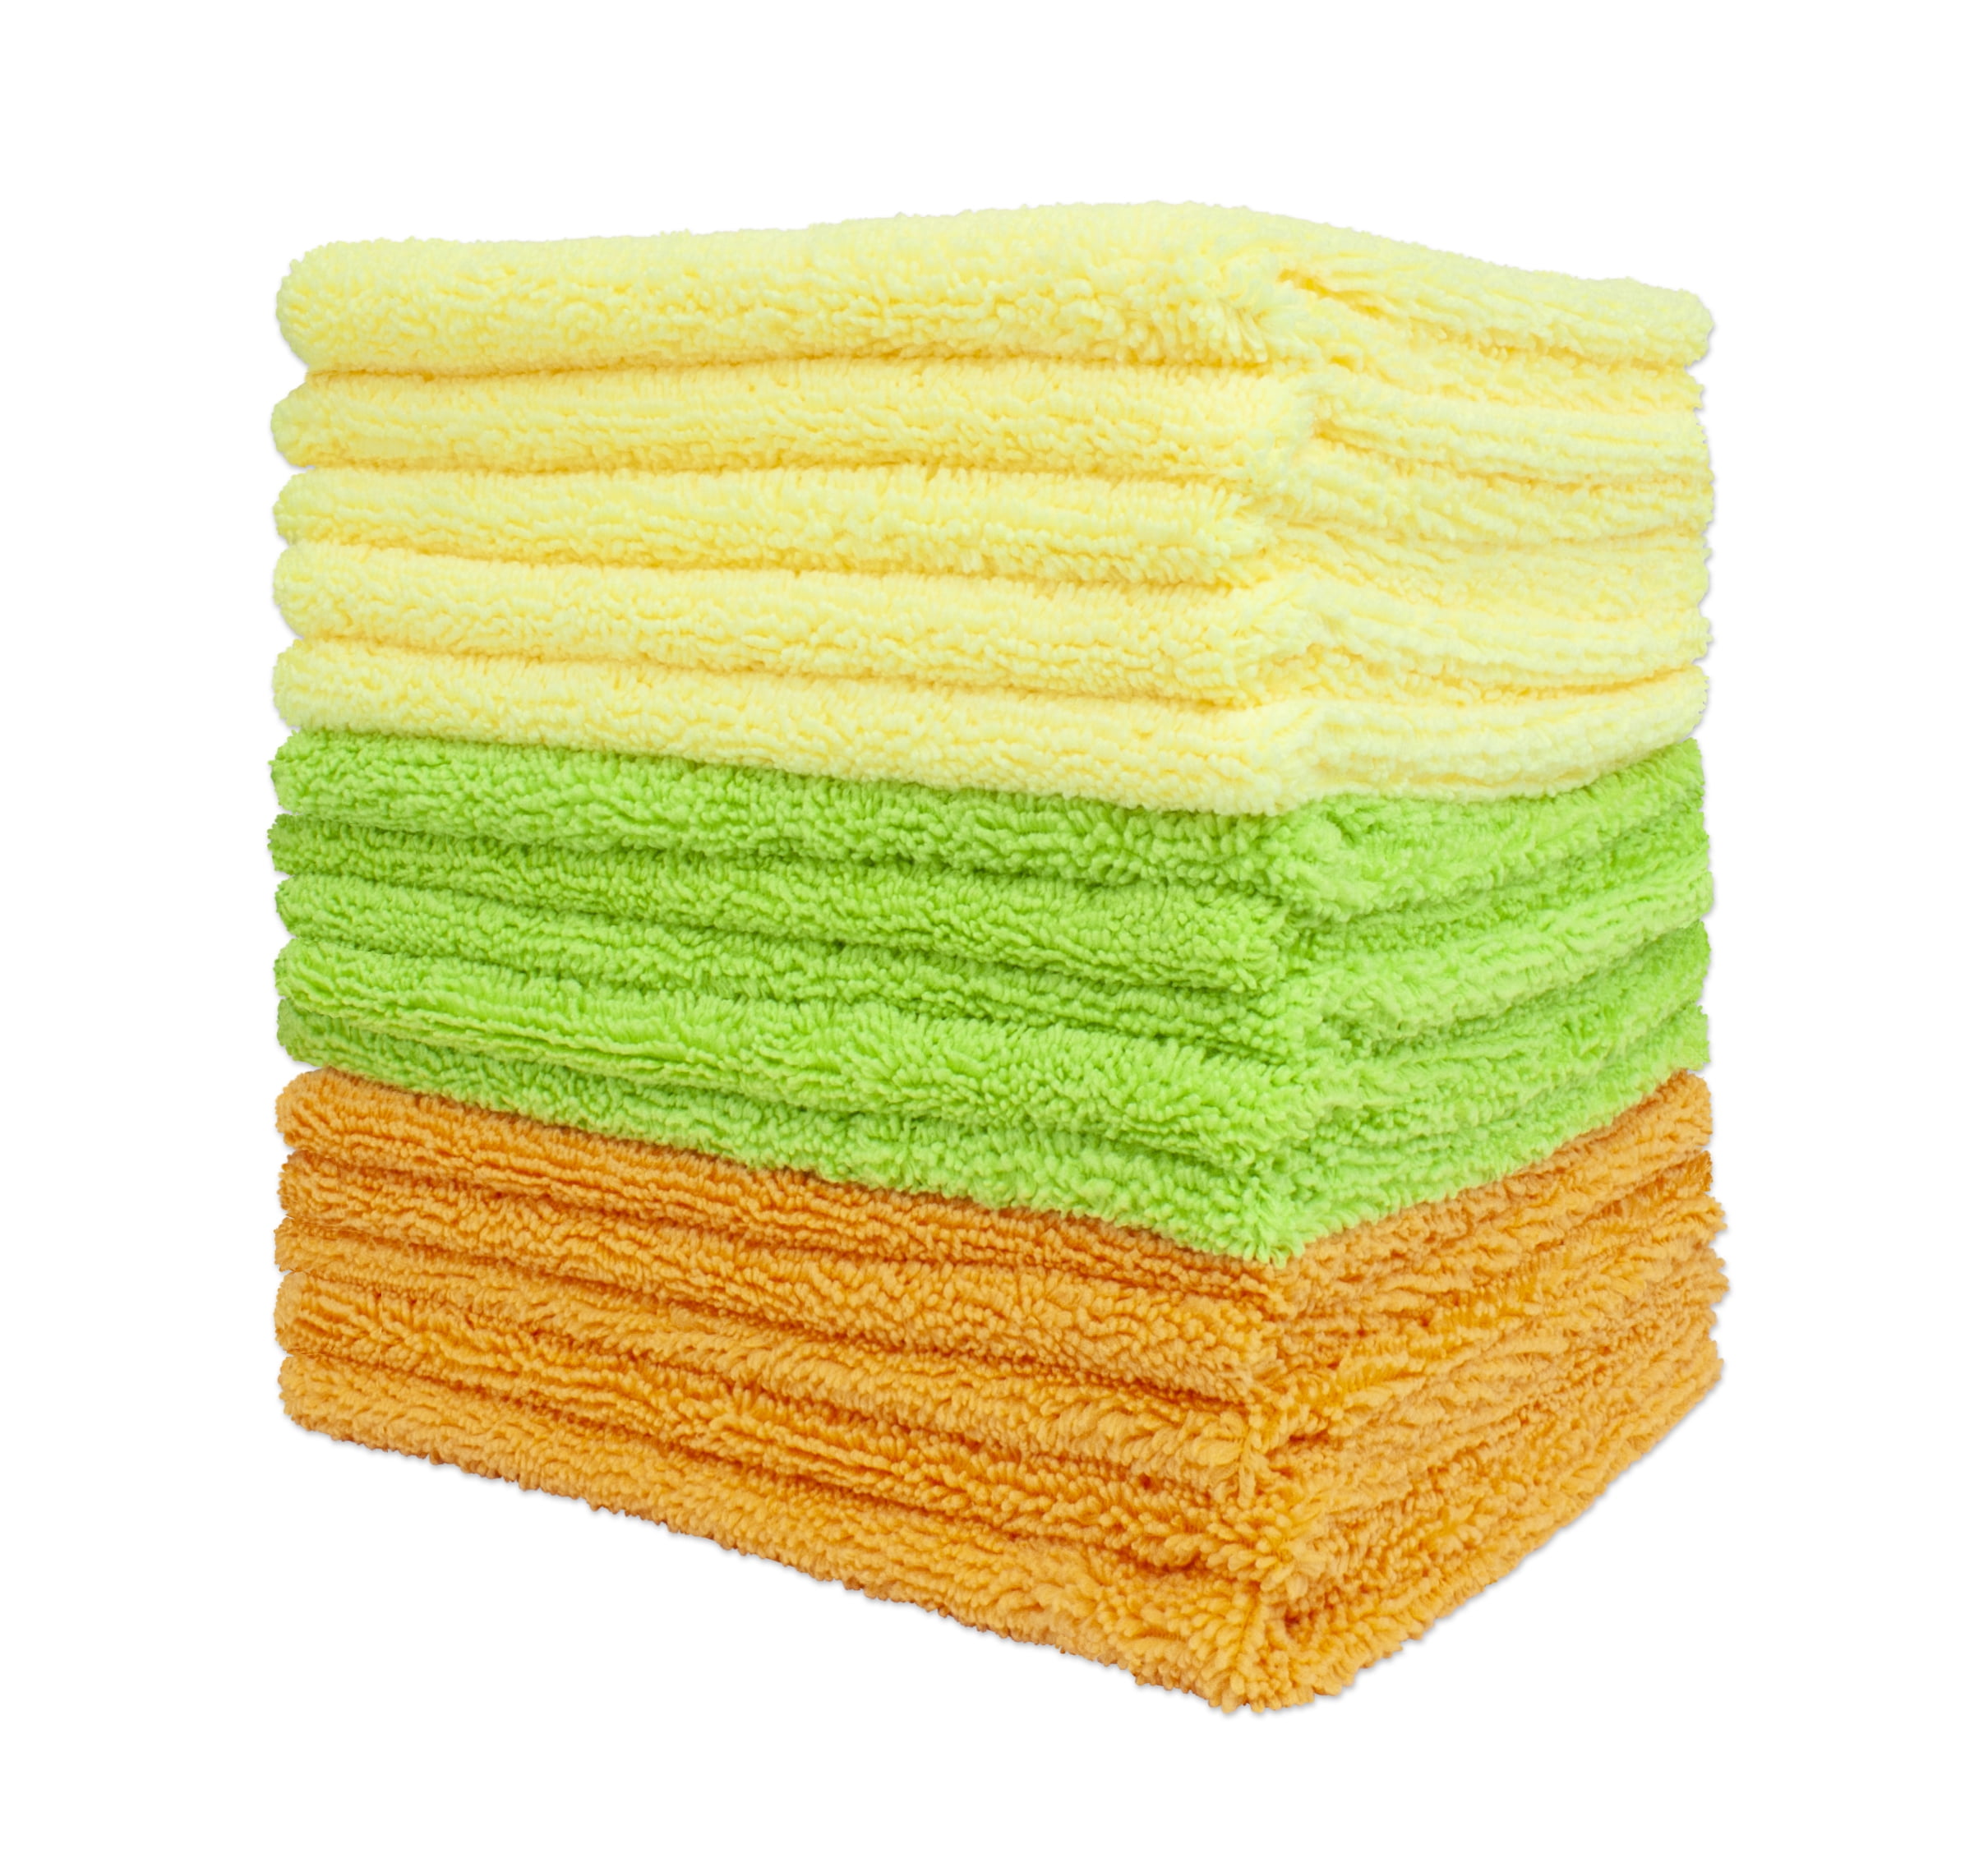 240 Microfiber 16"x16" Cleaning/Auto Detailing Towels MIXED COLORS PRO GRADE 